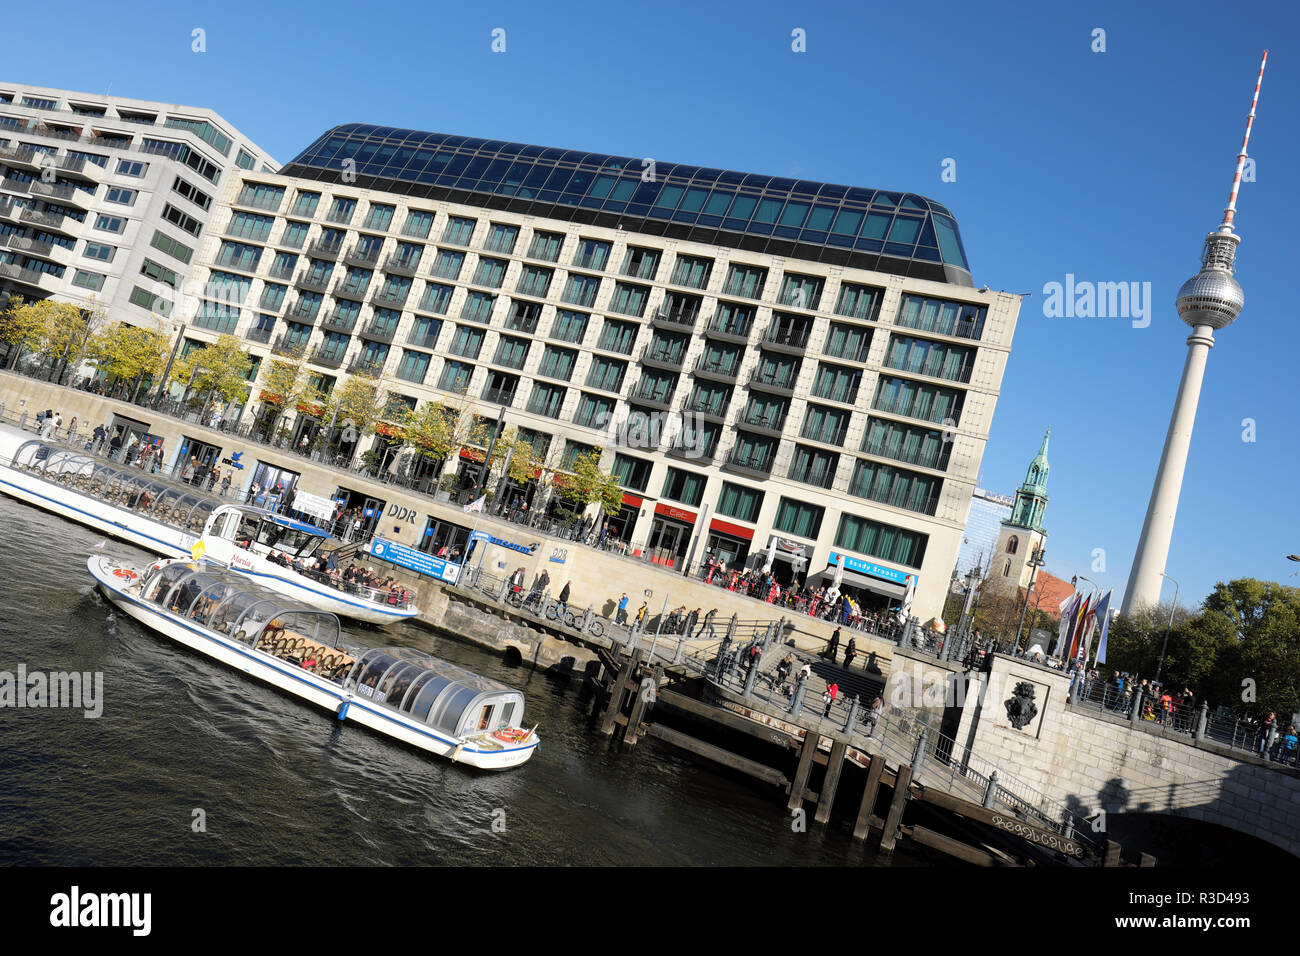 Berlin Germany - Boat tours on the River Spree pass the DDR Museum with the Fernsehturm TV Tower in background - Autumn 2018 Stock Photo